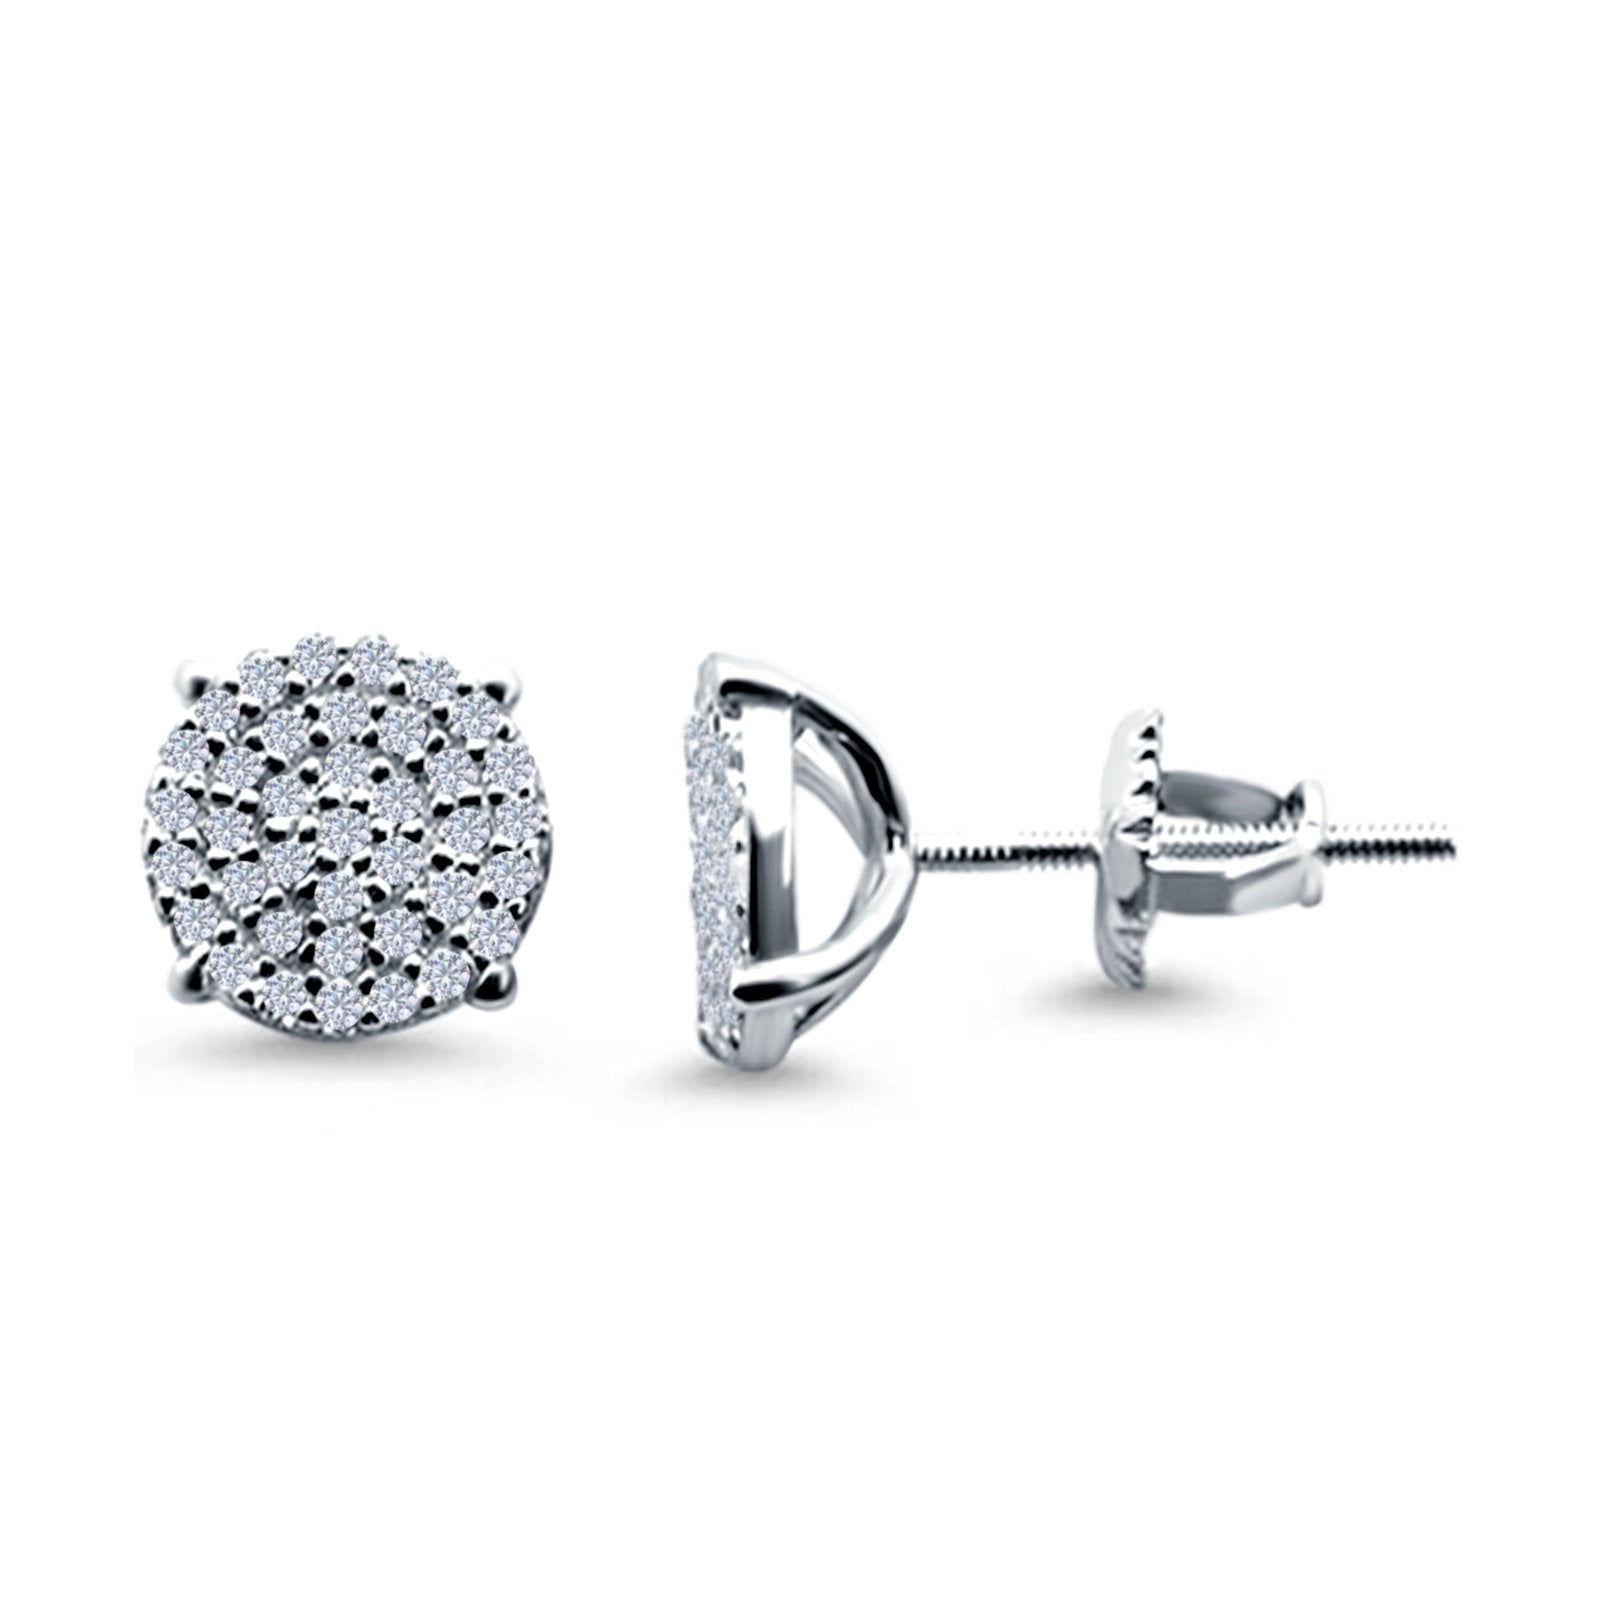 Hip Hop Stud Earrings Screwback Round Simulated CZ 925 Sterling Silver (10mm)